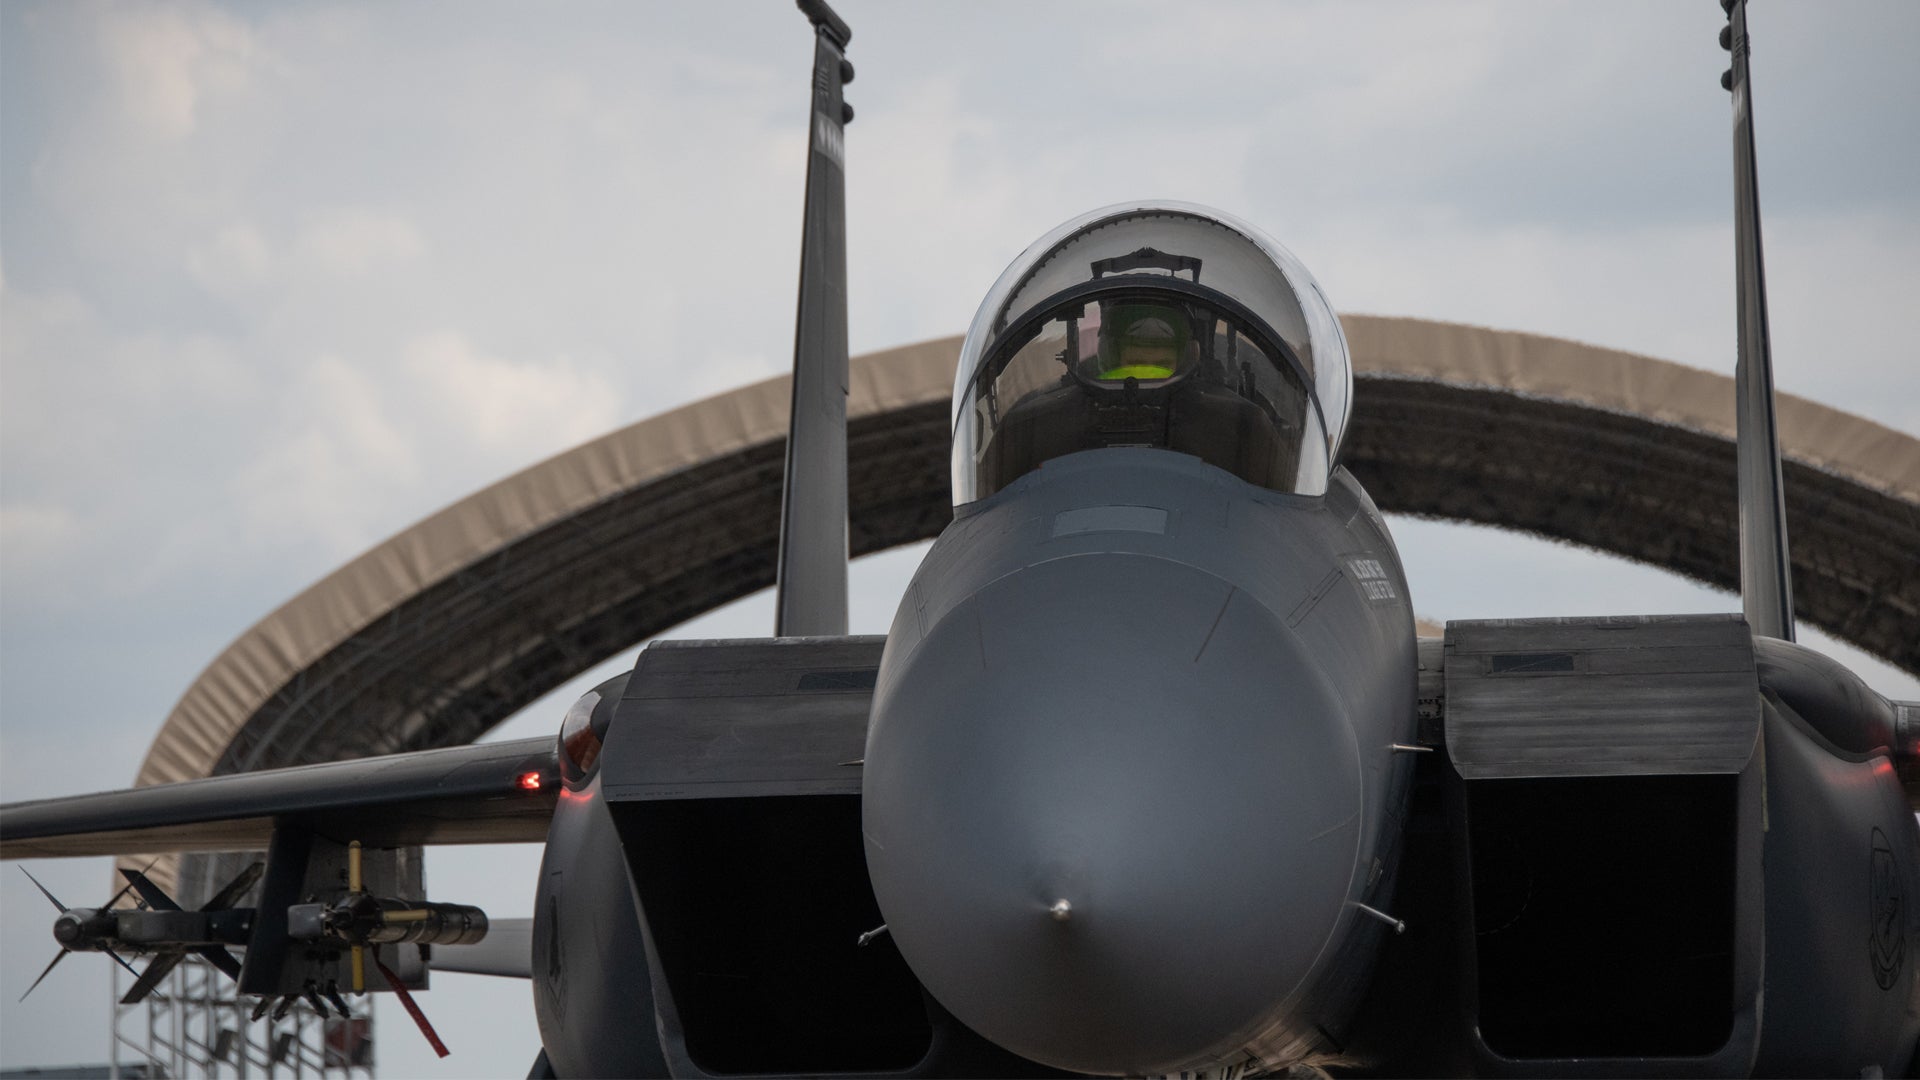 An F-15E Strike Eagle prepares to taxi at Eglin Air Force Base, Fla. to perform an in-flight vapor purge test, Aug. 16, 2022. This test is part of a larger Department of Defense effort to evaluate cockpit environmental conditions after a chemical weapon attack (Ilka Cole/U.S. Air Force)